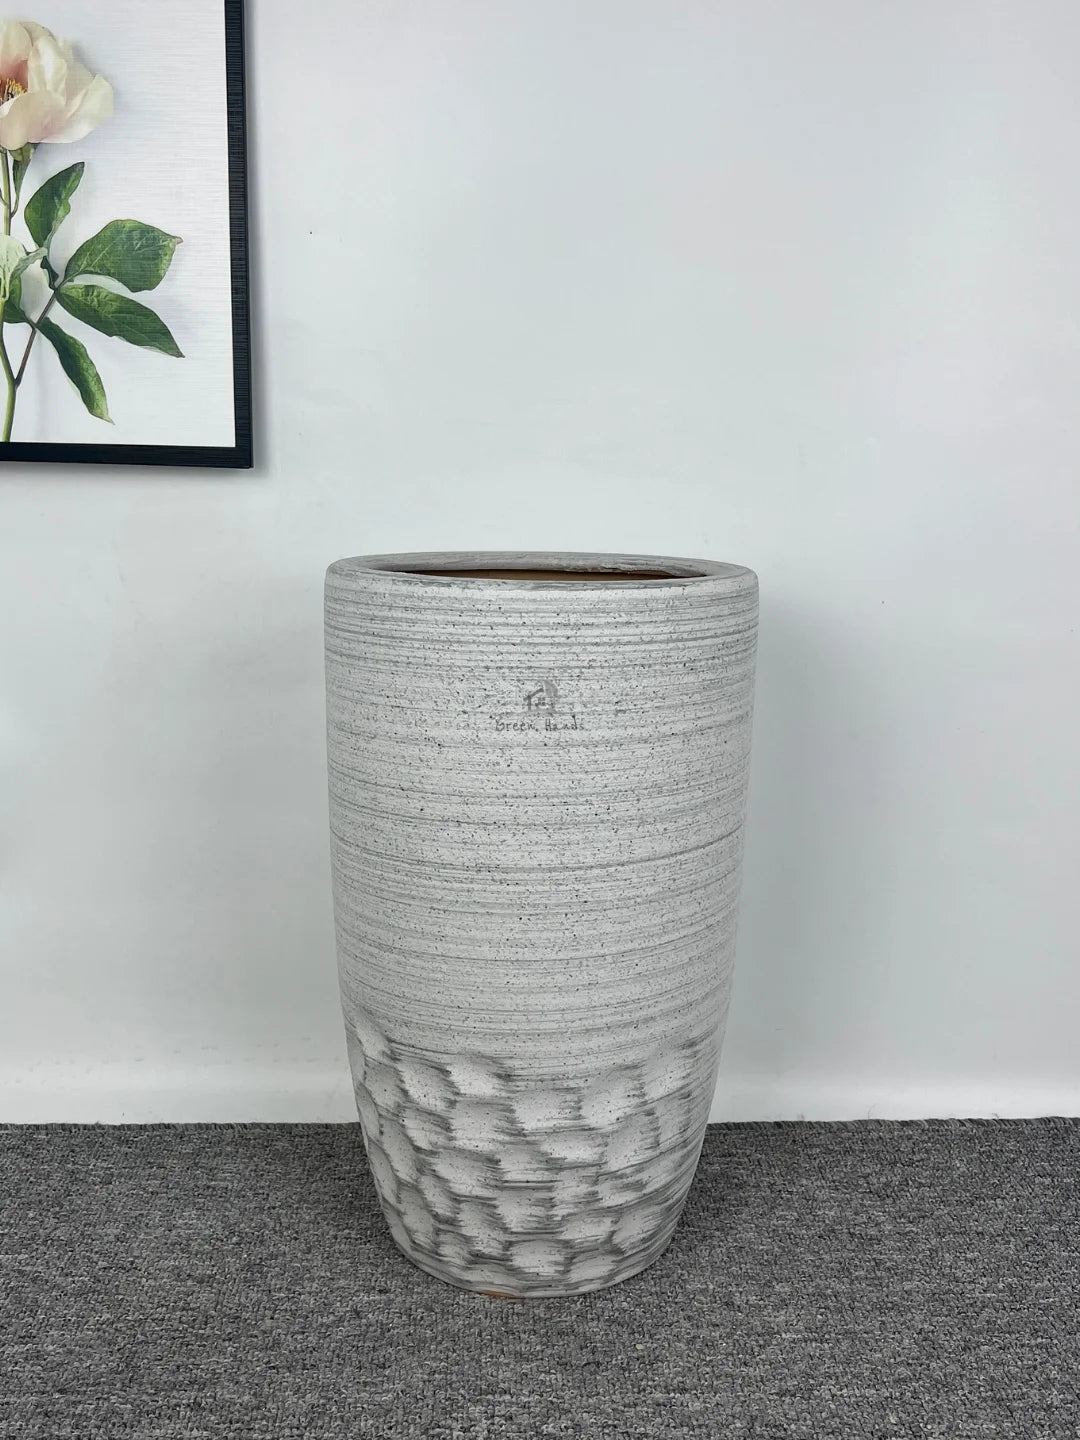 Modern Tall Ceramic Grey Honey Comb Pots: Elegance and Functionality Combined Set